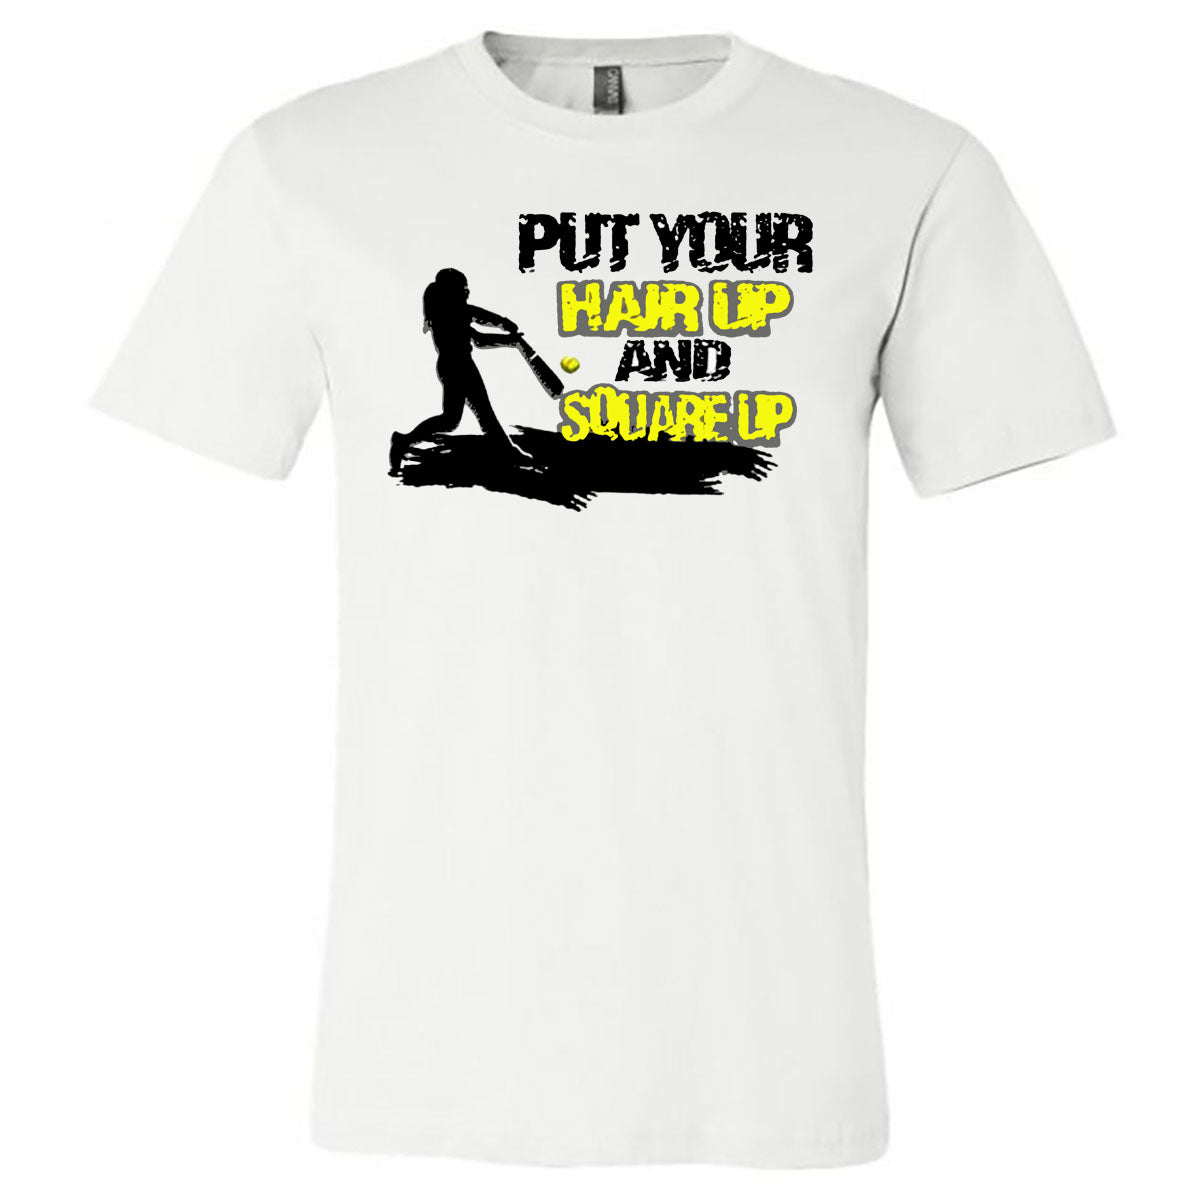 Softball - Put Your Hair Up And Square Up - White Short Sleeve Tee - Southern Grace Creations